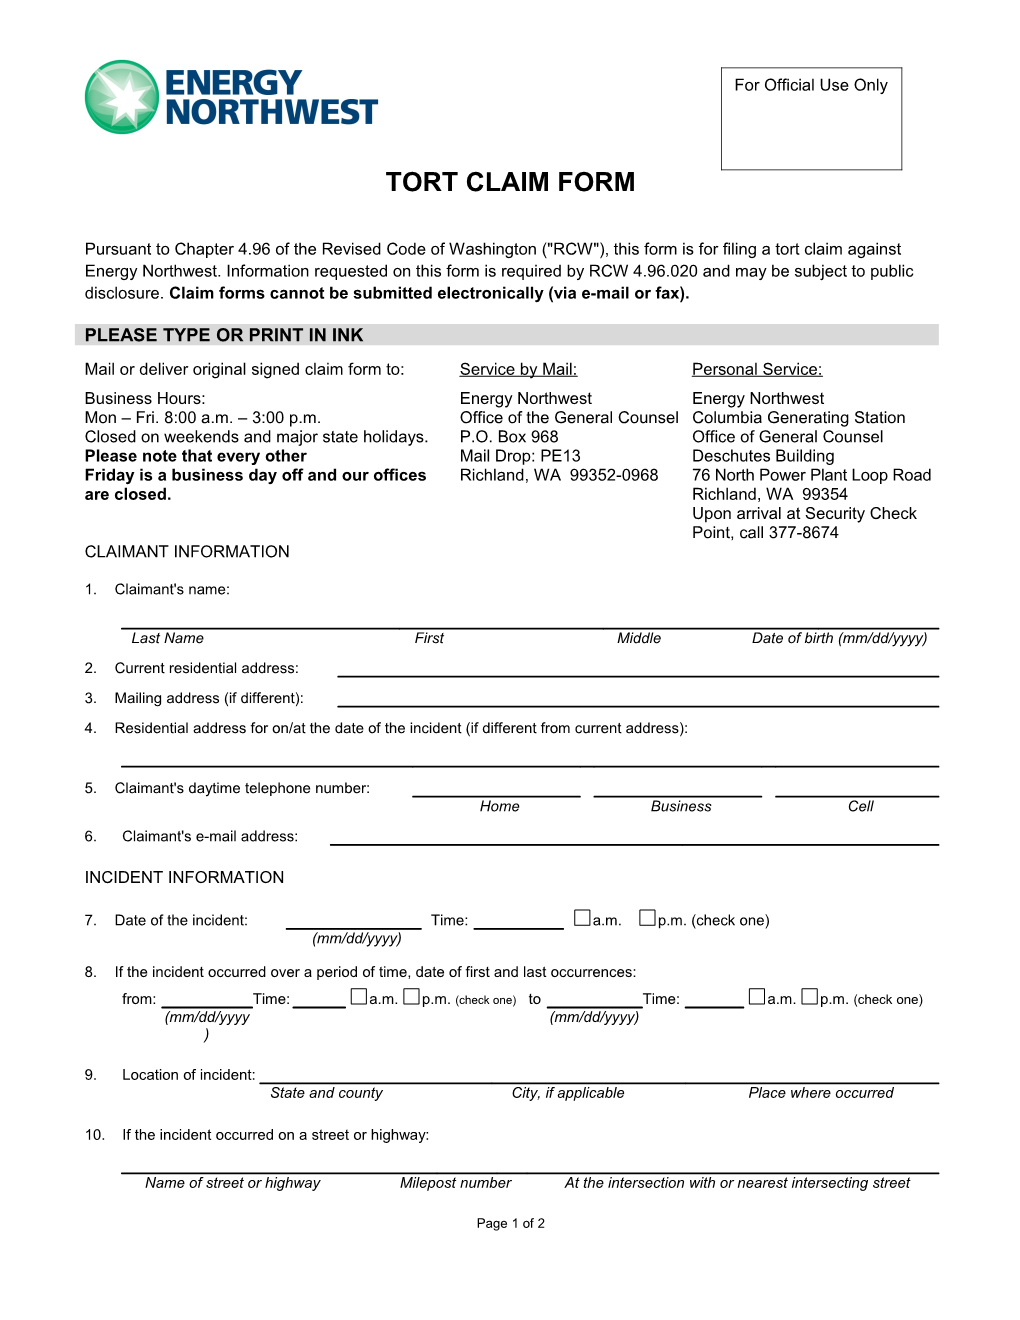 Instructions for Completing a Tort Claim Form